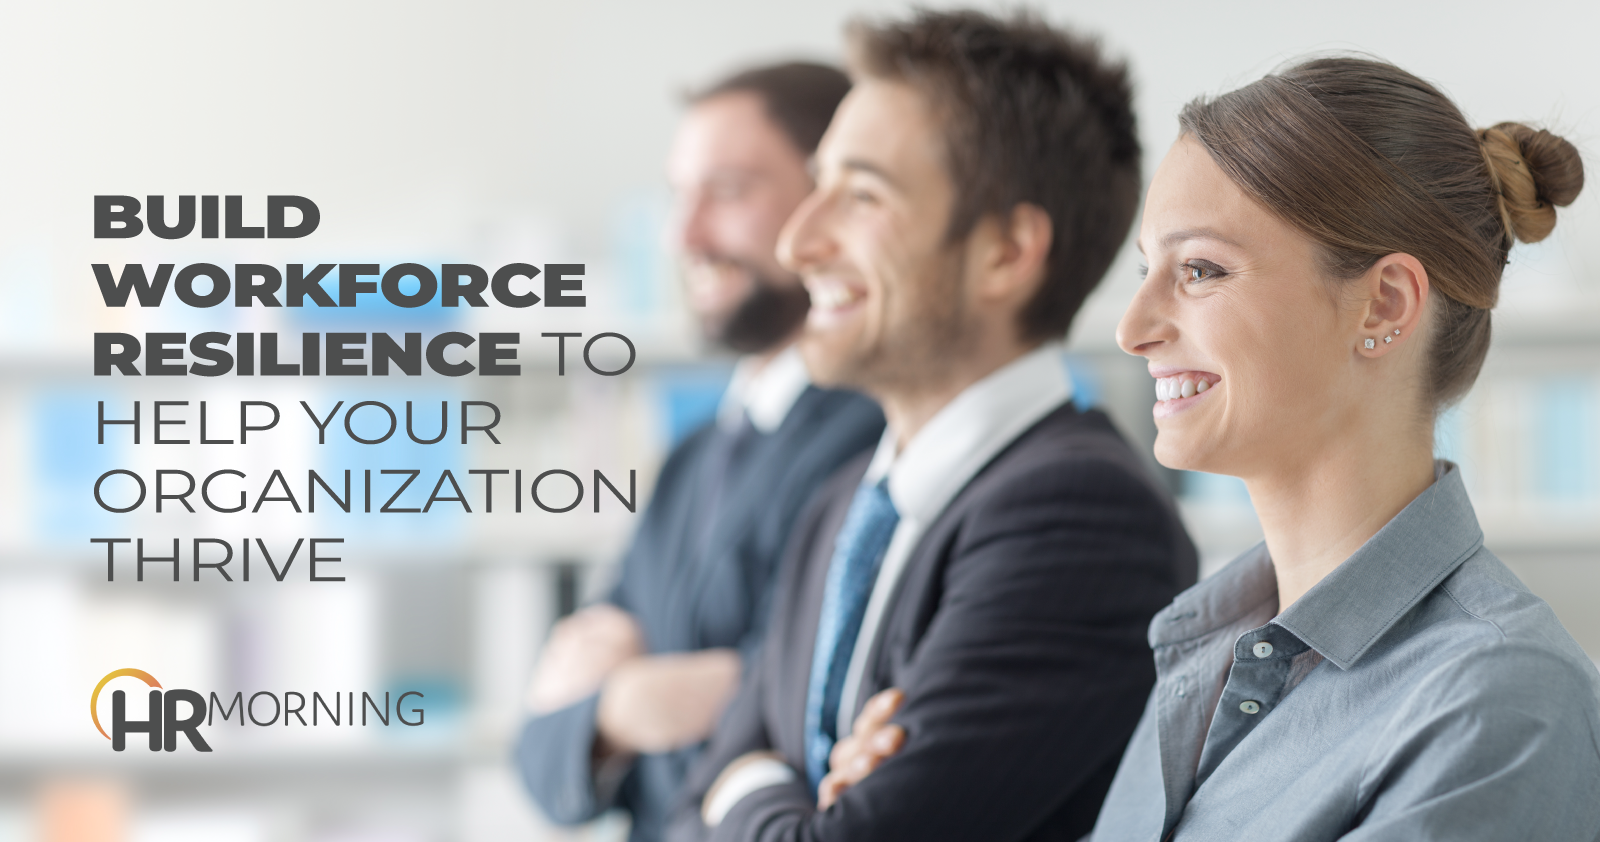 Build workforce resilience to help your organization thrive